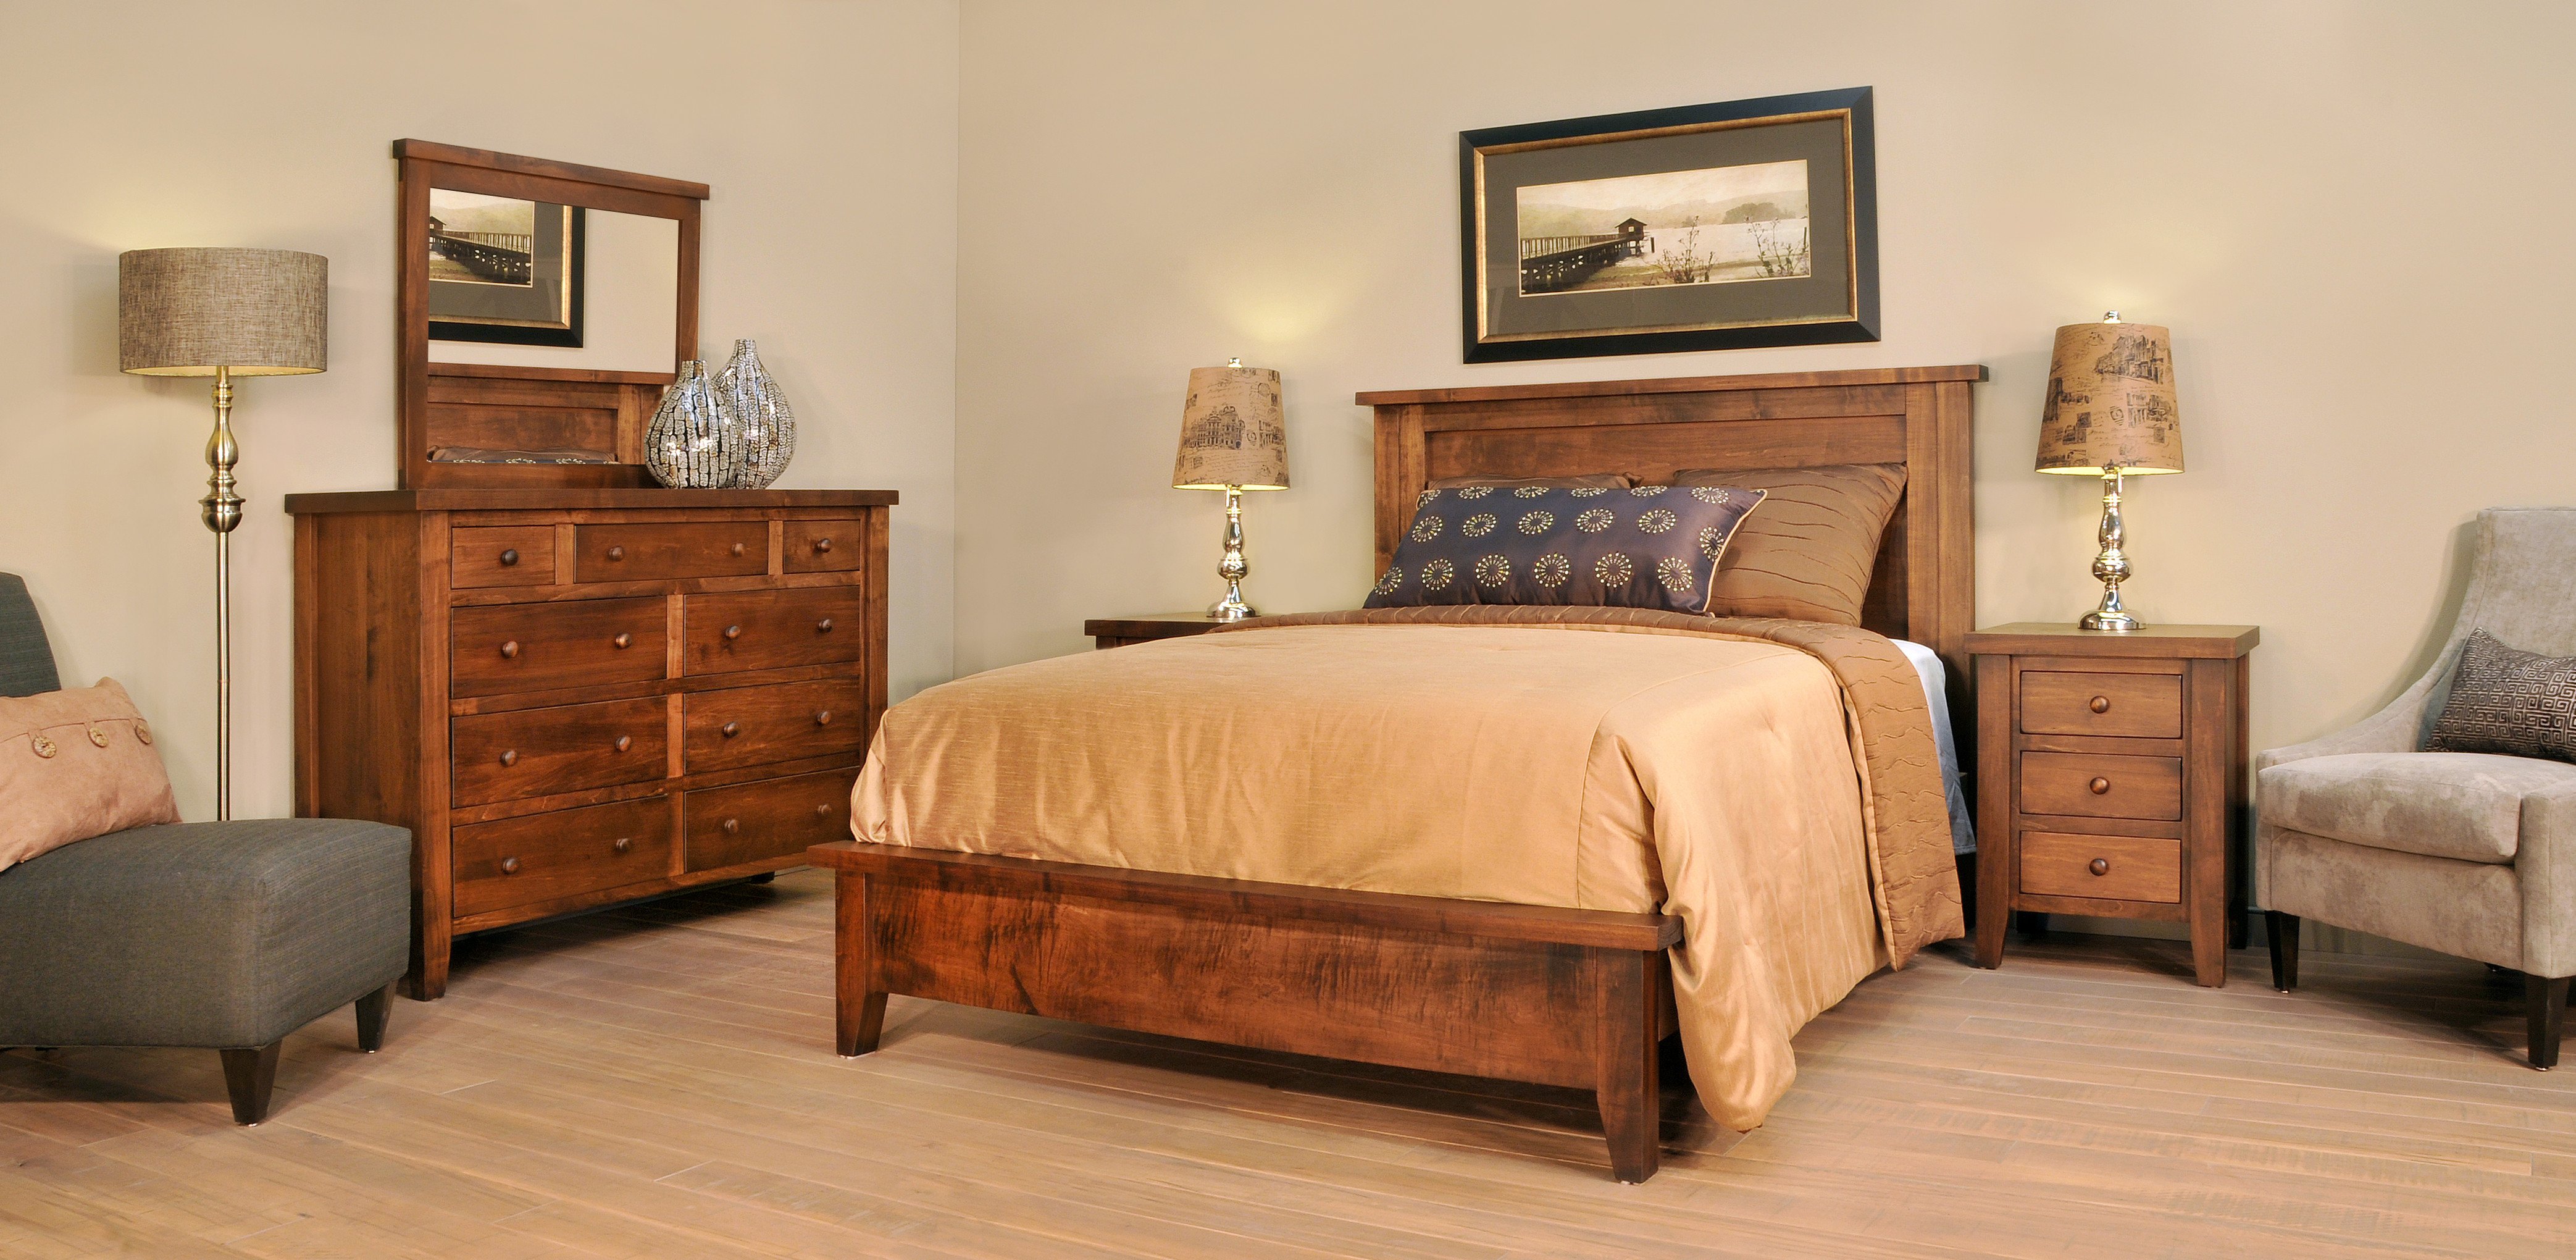 King Size Oak Bedroom Set Awesome Farmhouse Bed Collection – Amish Oak Warehouse